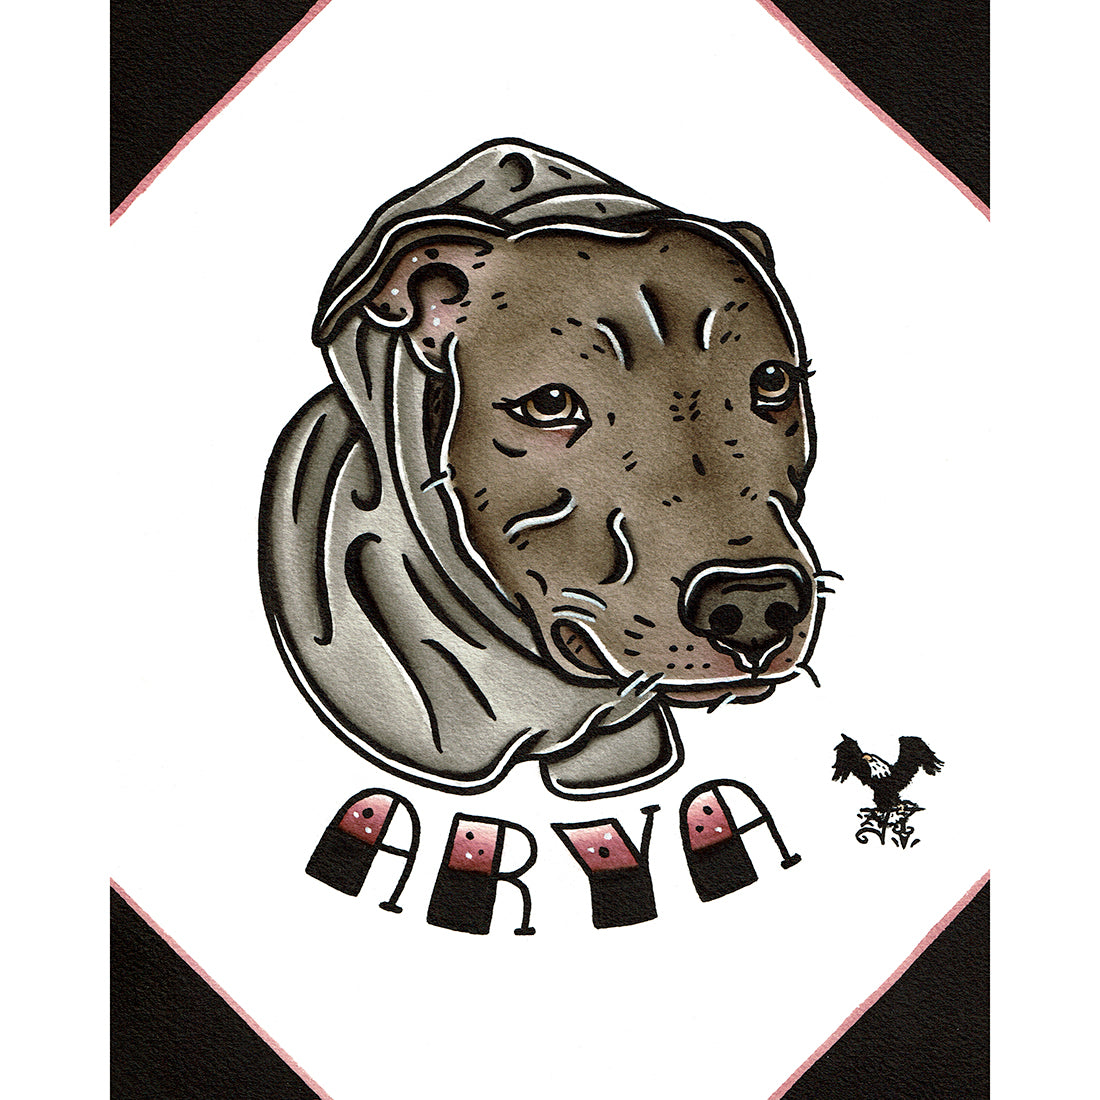 American traditional tattoo flash illustration Pitbull in hoodie Pet Portrait watercolor painting commission.